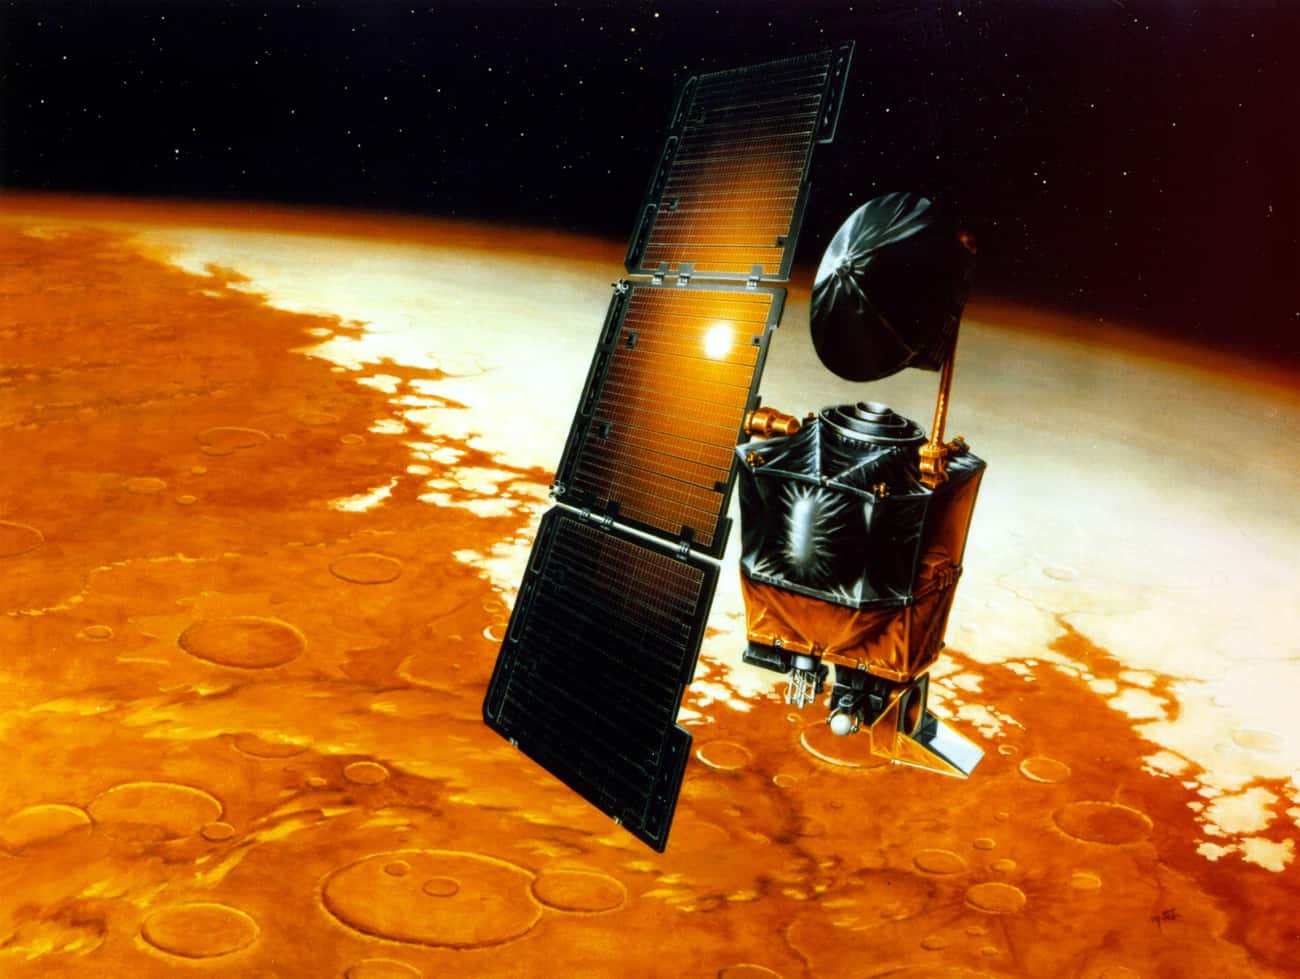 Mars Climate Orbiter Crashed Due To A Code Error